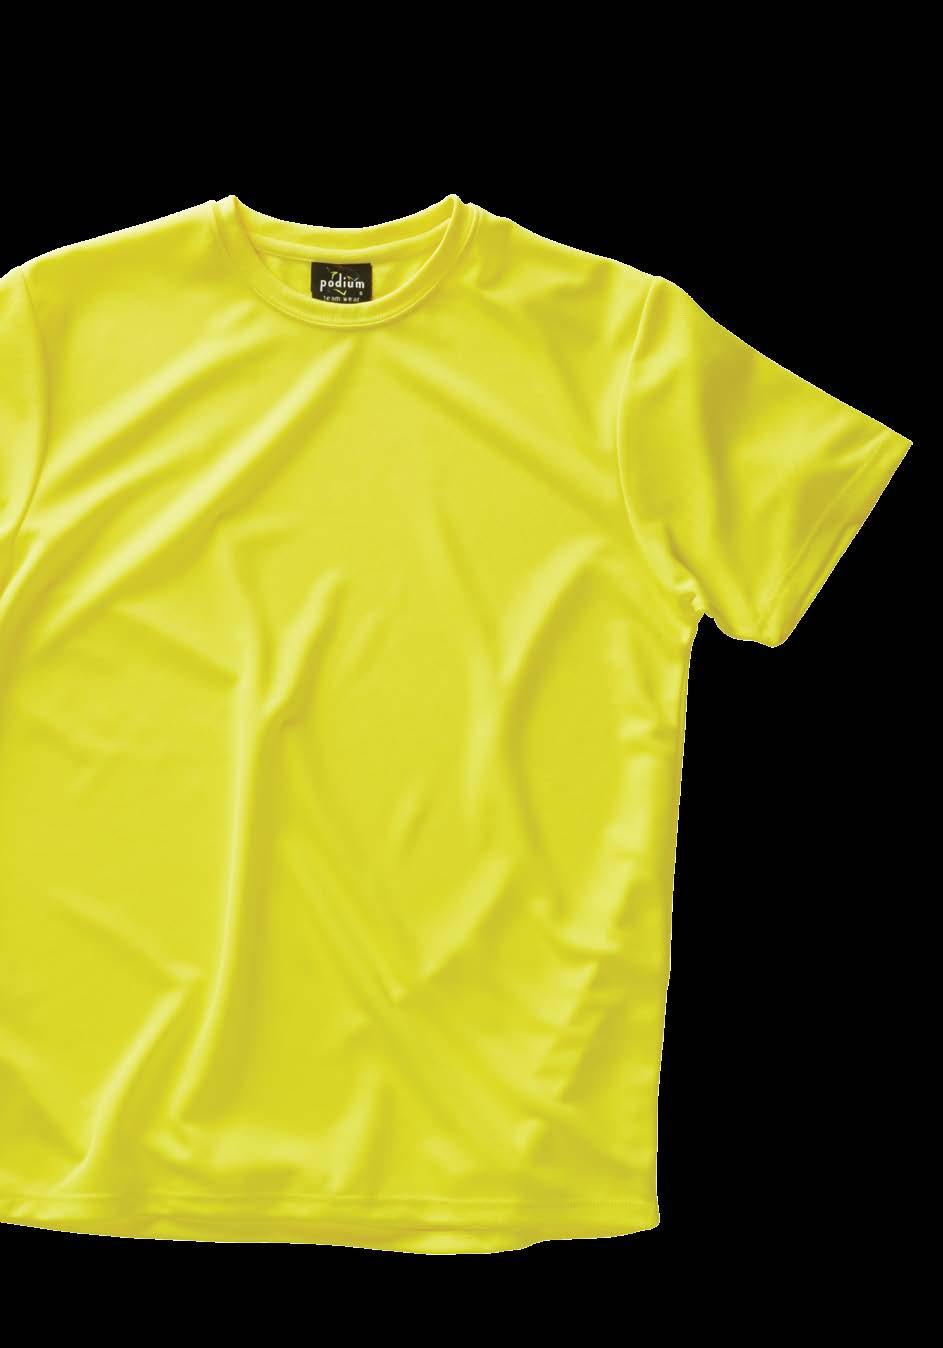 30 7PNFT ULTIMATE SPORTS COLOURED TEE A popular team